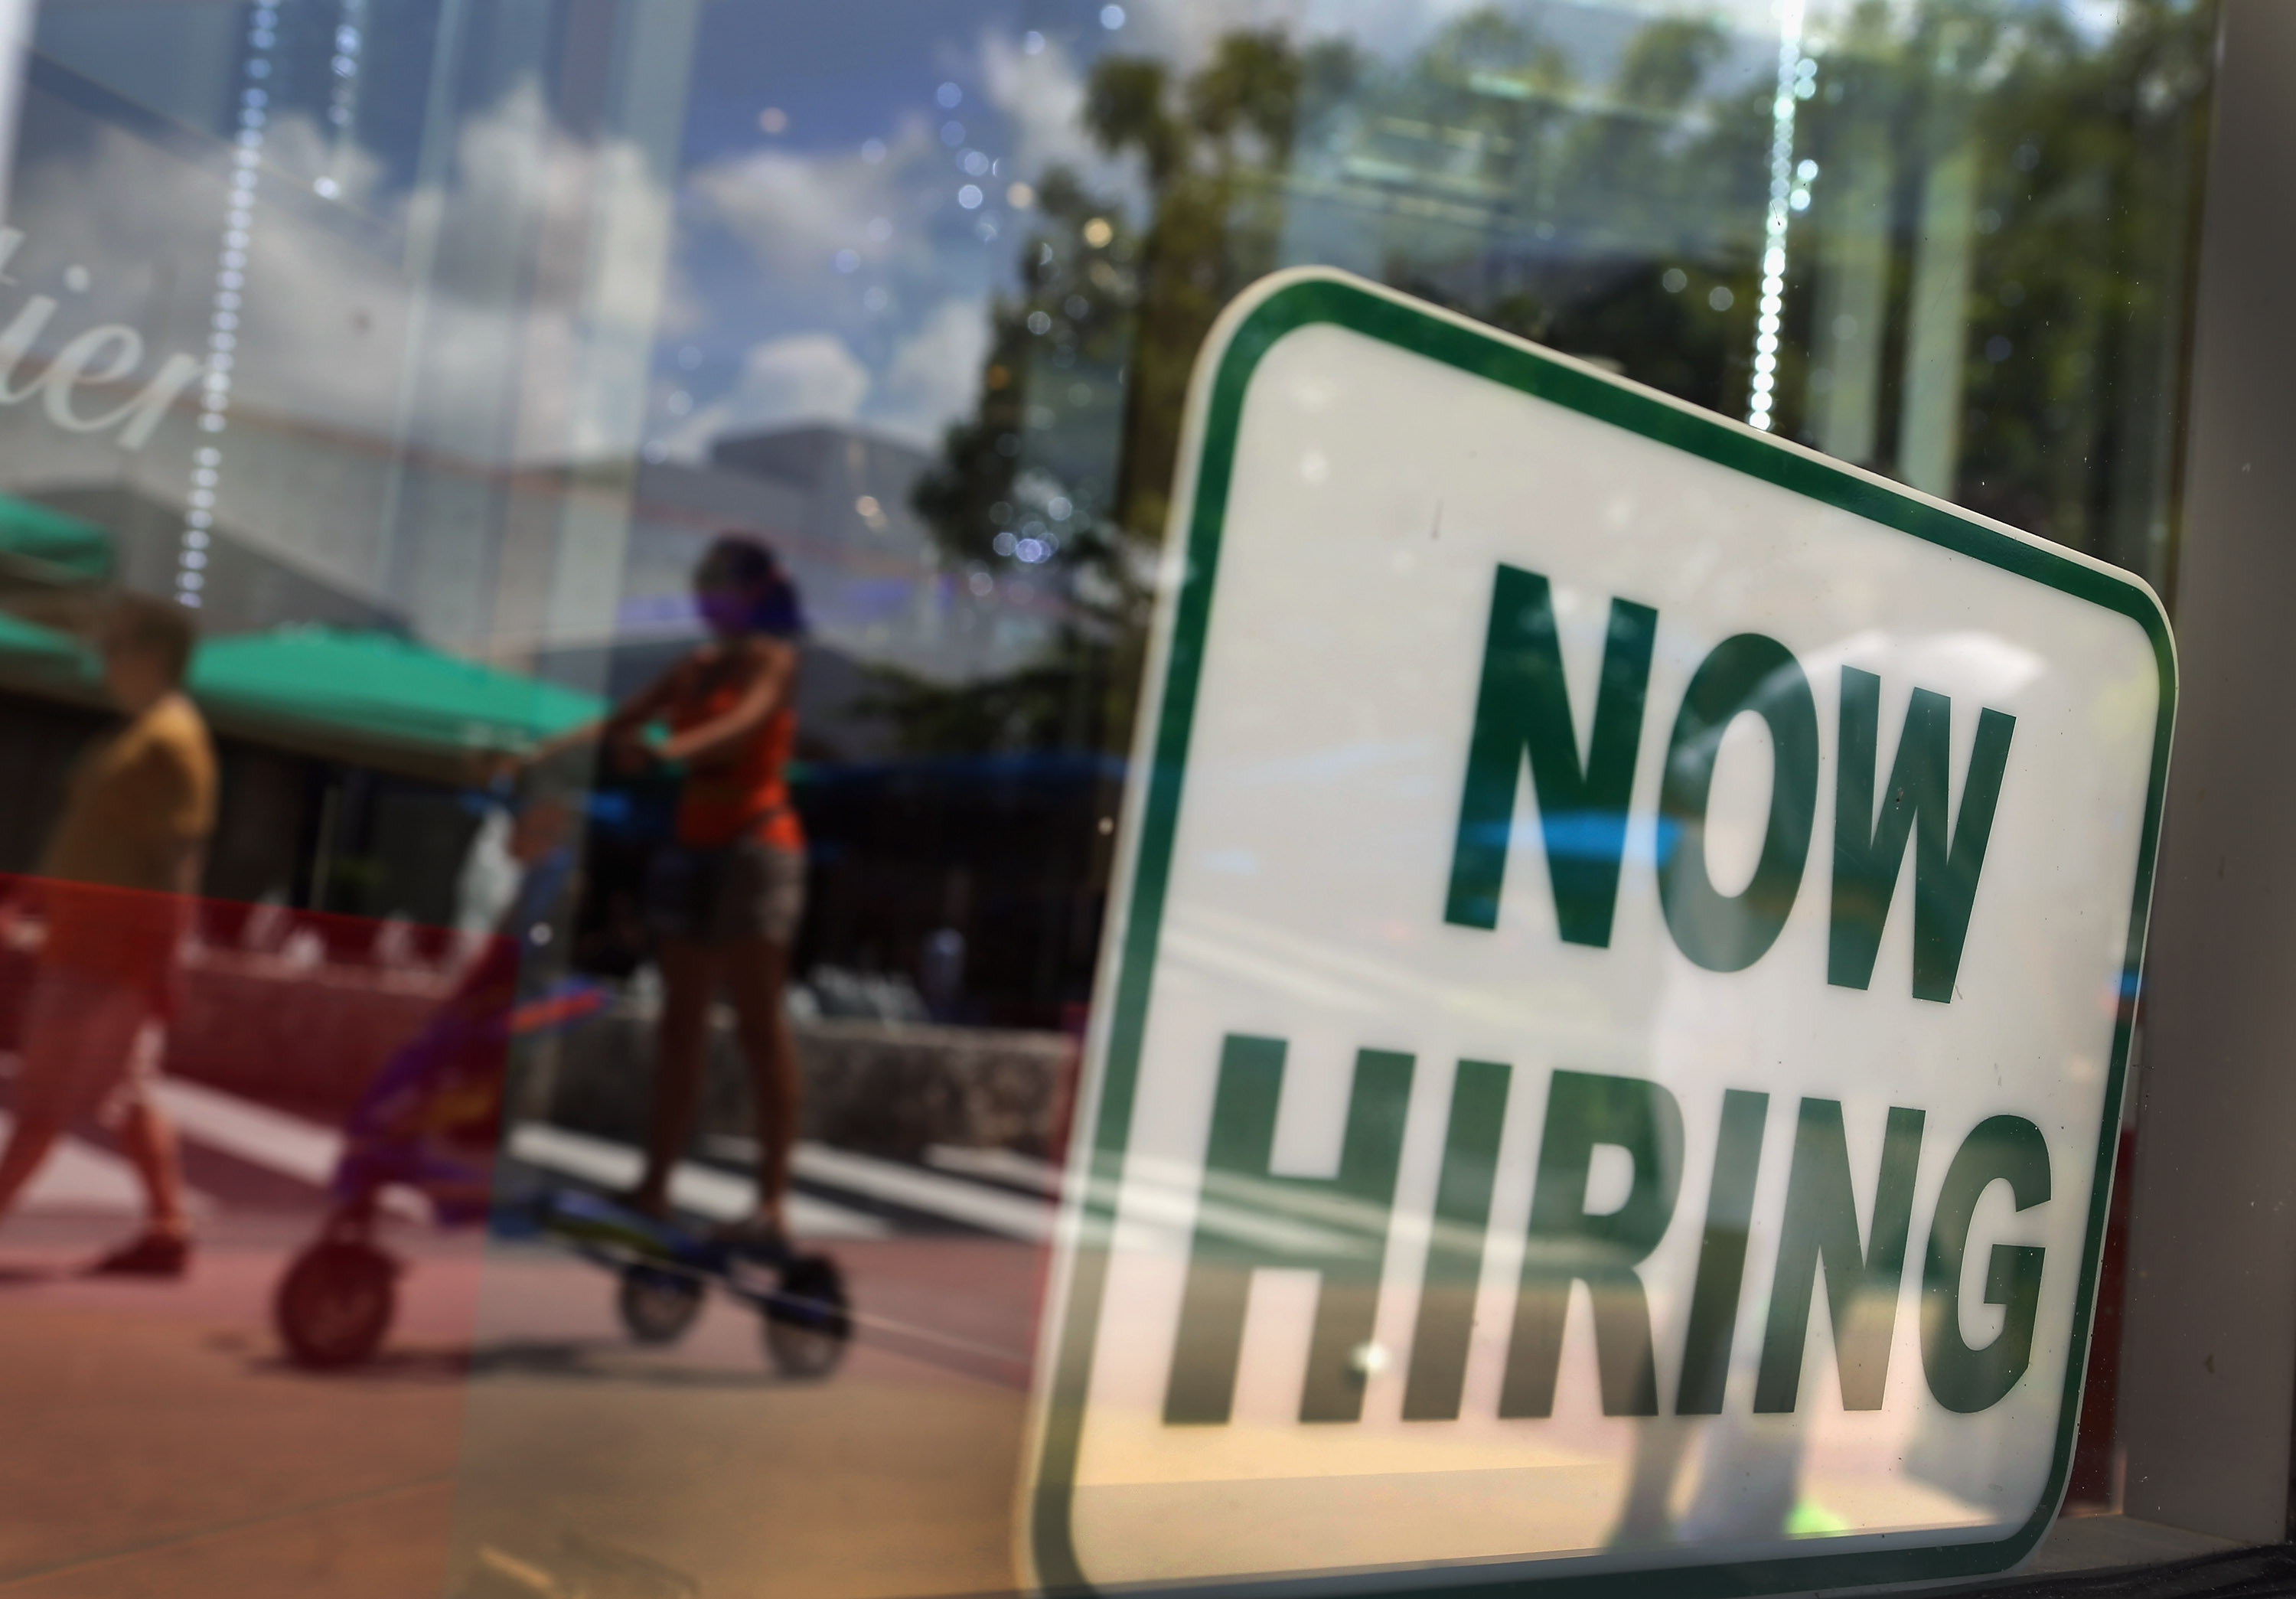 Now Hiring Hundreds of jobs available at Jacksonville job fair Tuesday